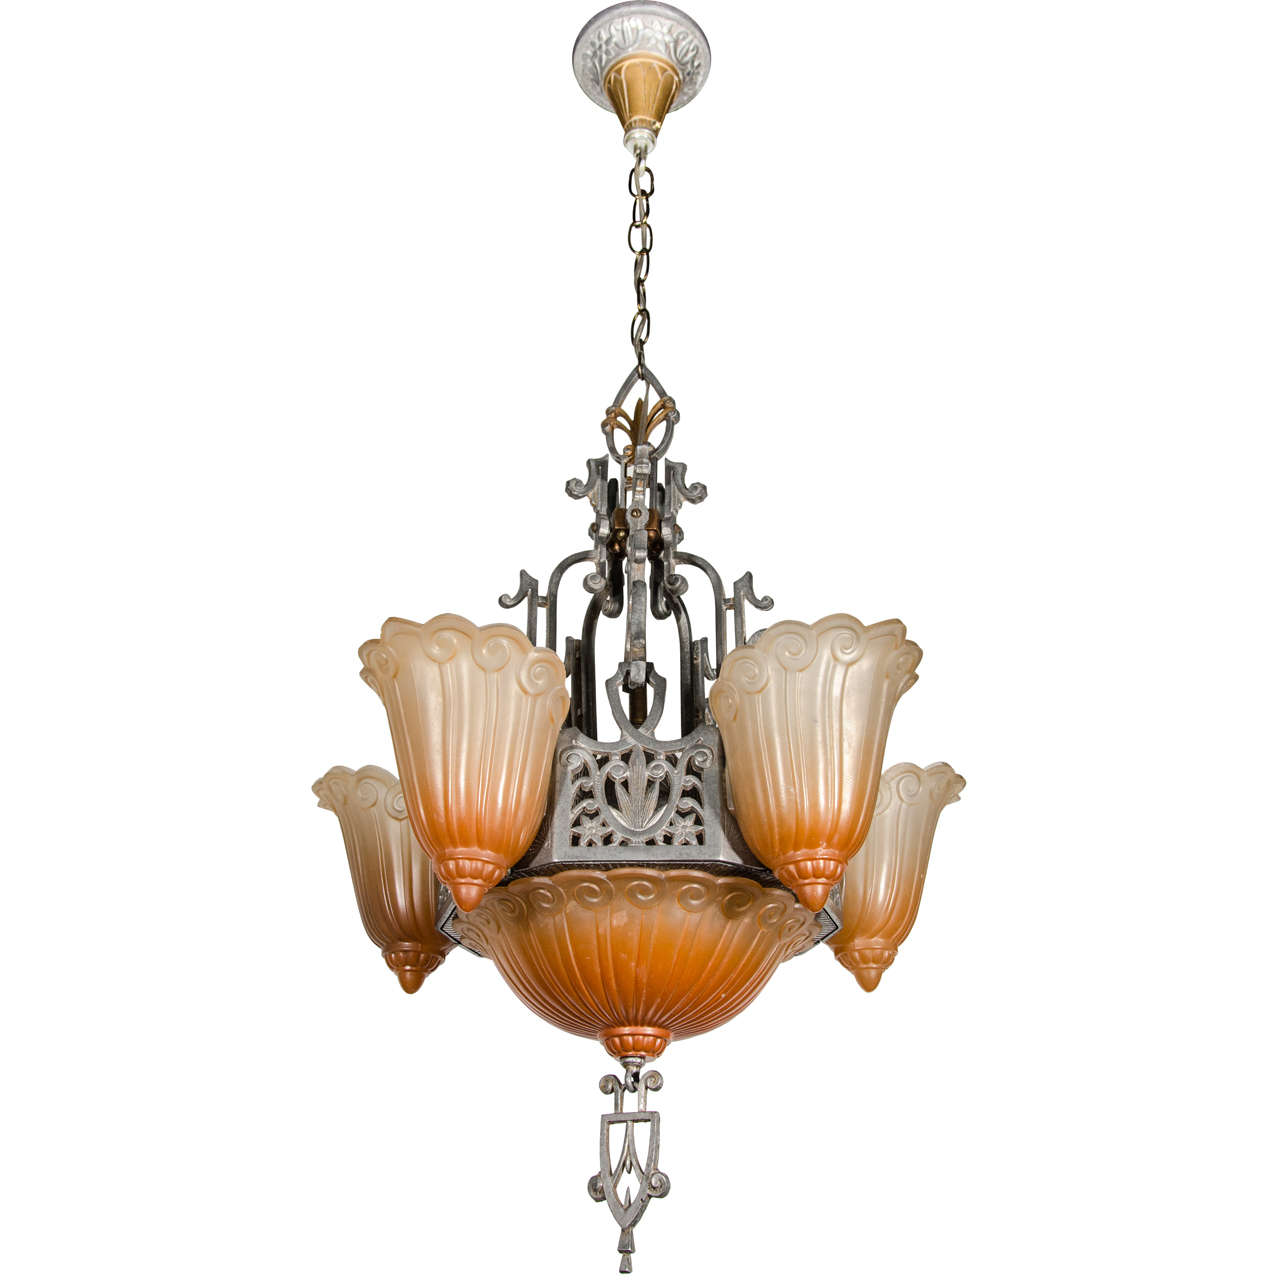 Art Deco Chandelier Designed by Lincoln Lightning Company